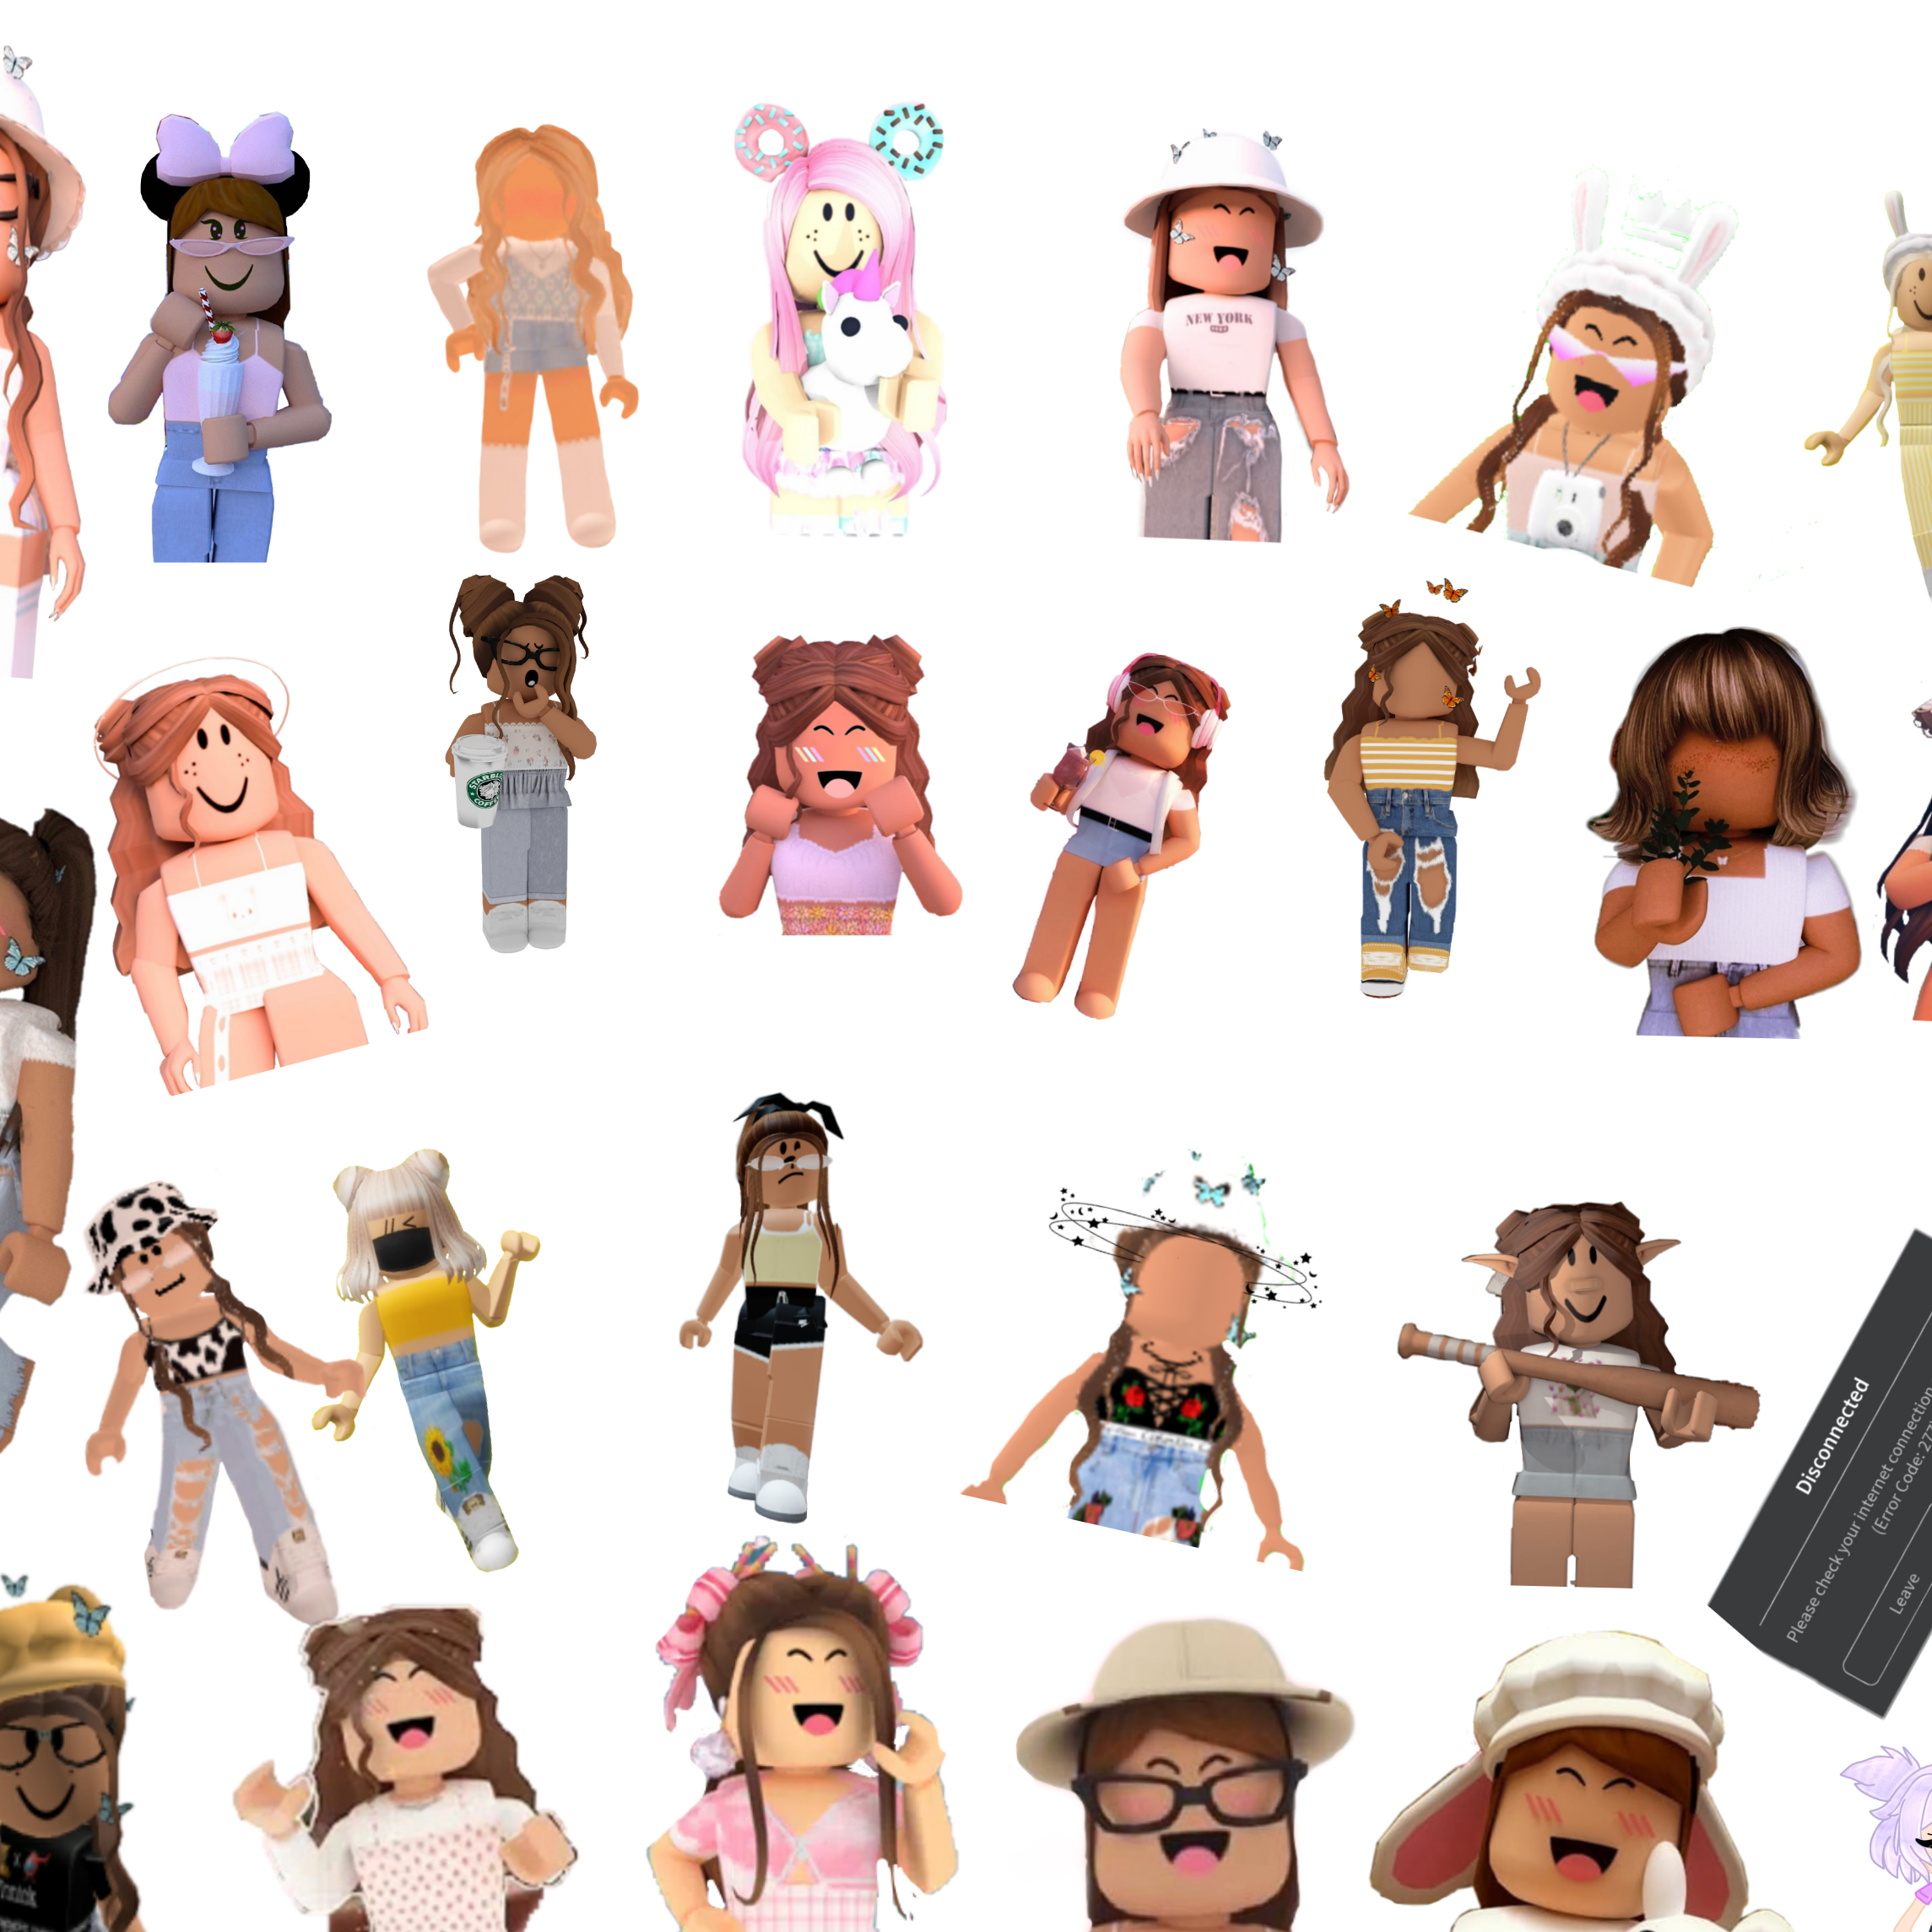 Aesthetic Roblox Wallpaper Girls / Roblox Aesthetic Wallpaper Top Free Roblox Aesthetic Background ludices on roblox and explore together!marissa join sini$ter sales